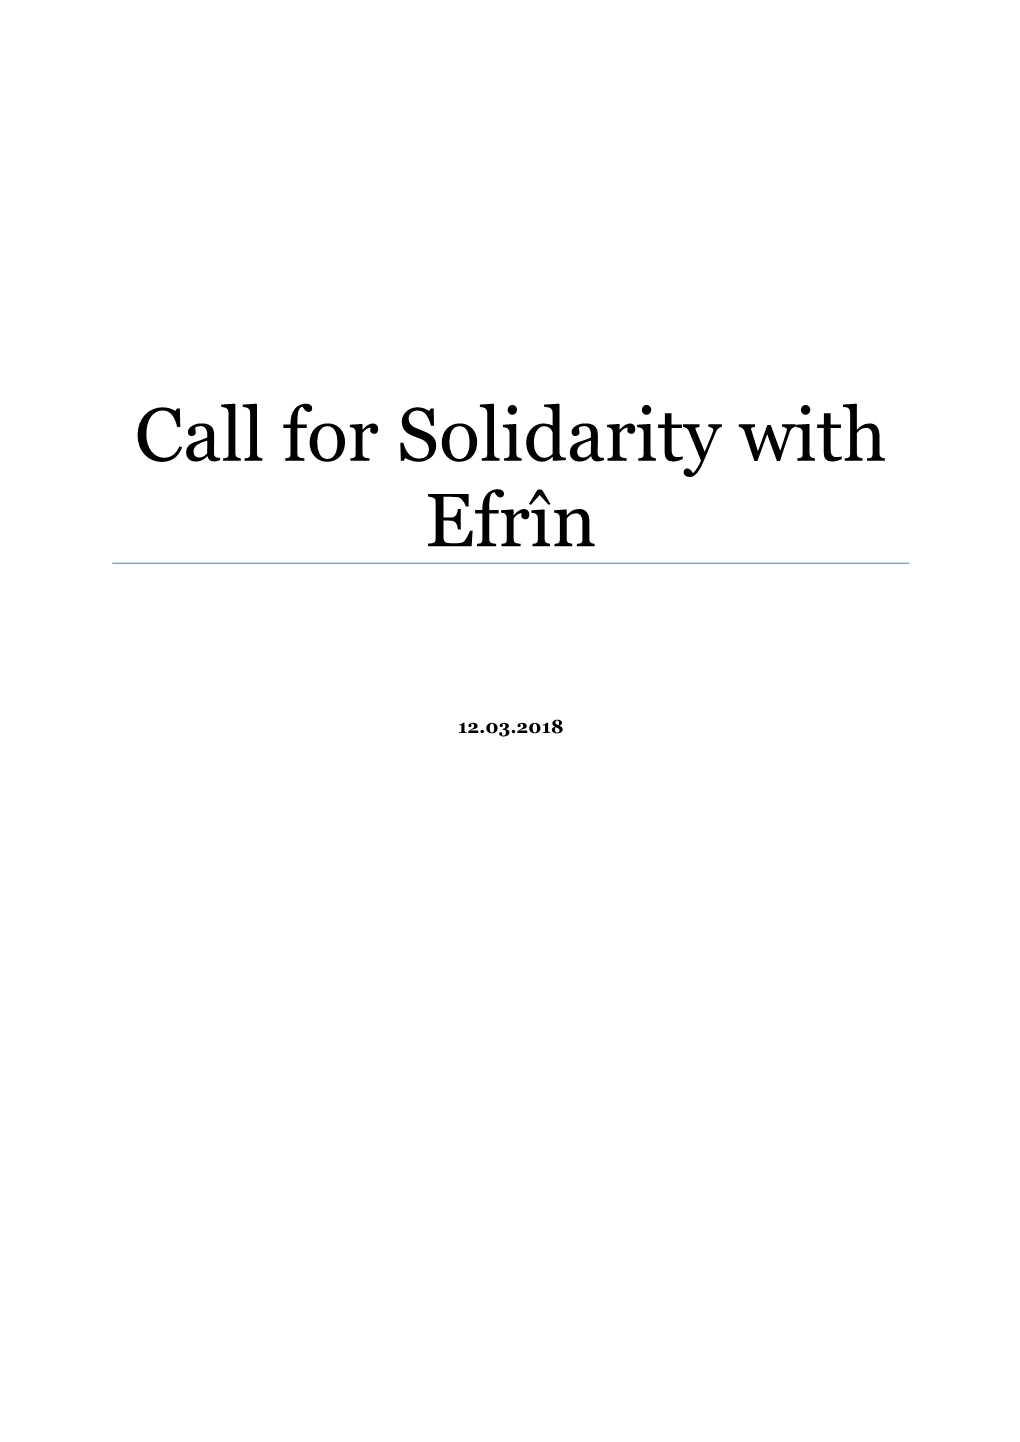 Call for Solidarity with Efrîn